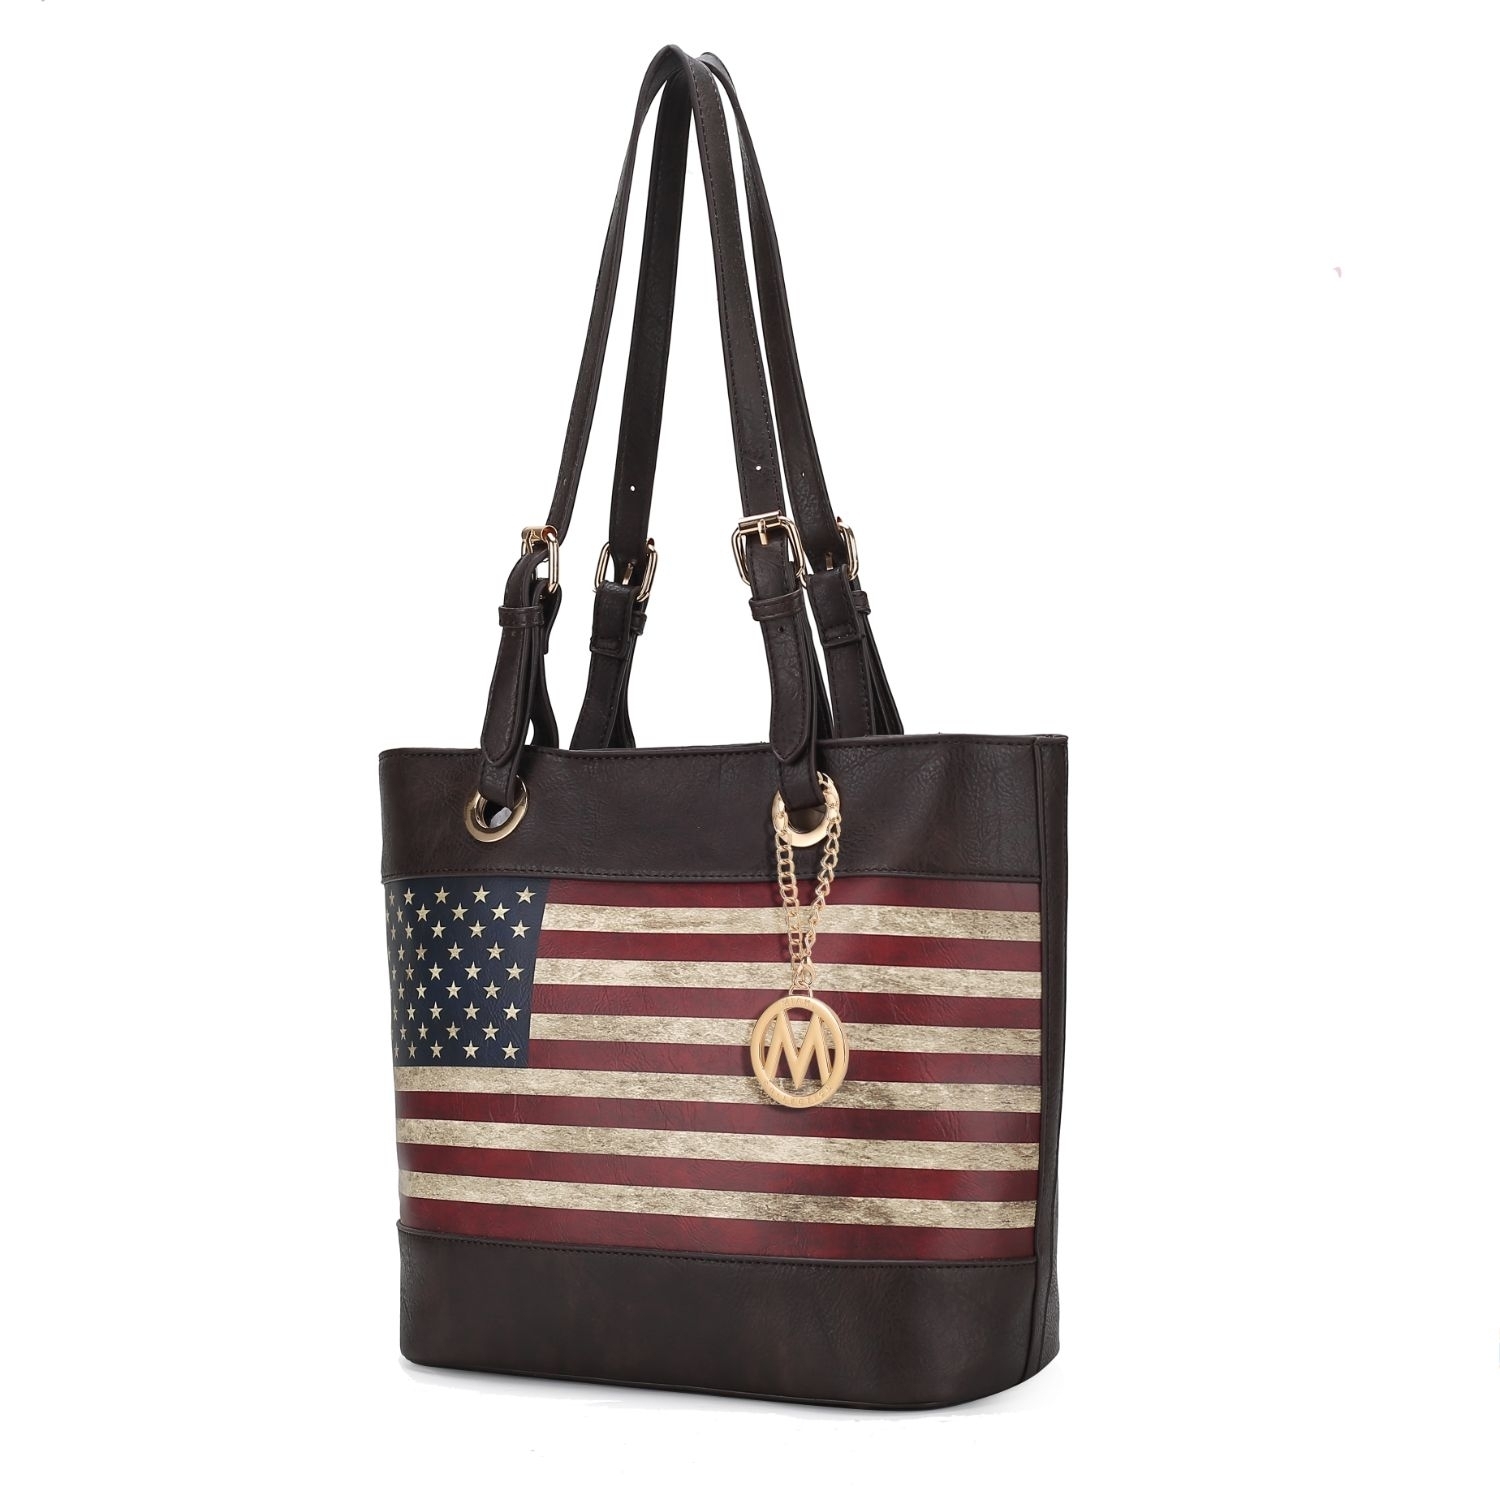 MKF Collection Vera Vegan Leather Patriotic Flag Pattern Women's Tote Bag By Mia K - Chocolate